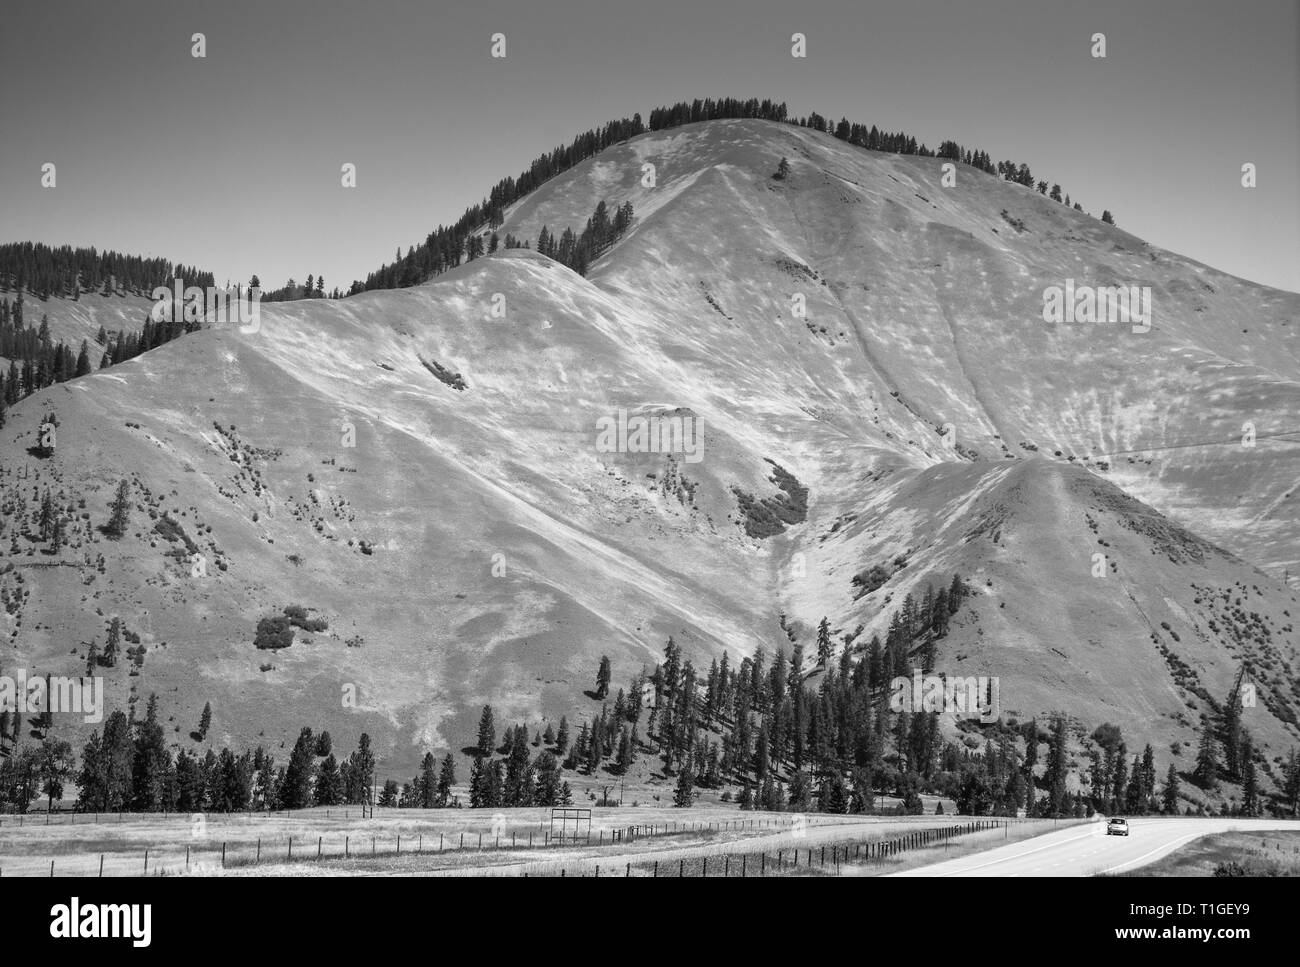 A beautiful stark mountain with a scattering of pines along the interstate highway I-90 in Montana, USA, in black and white Stock Photo